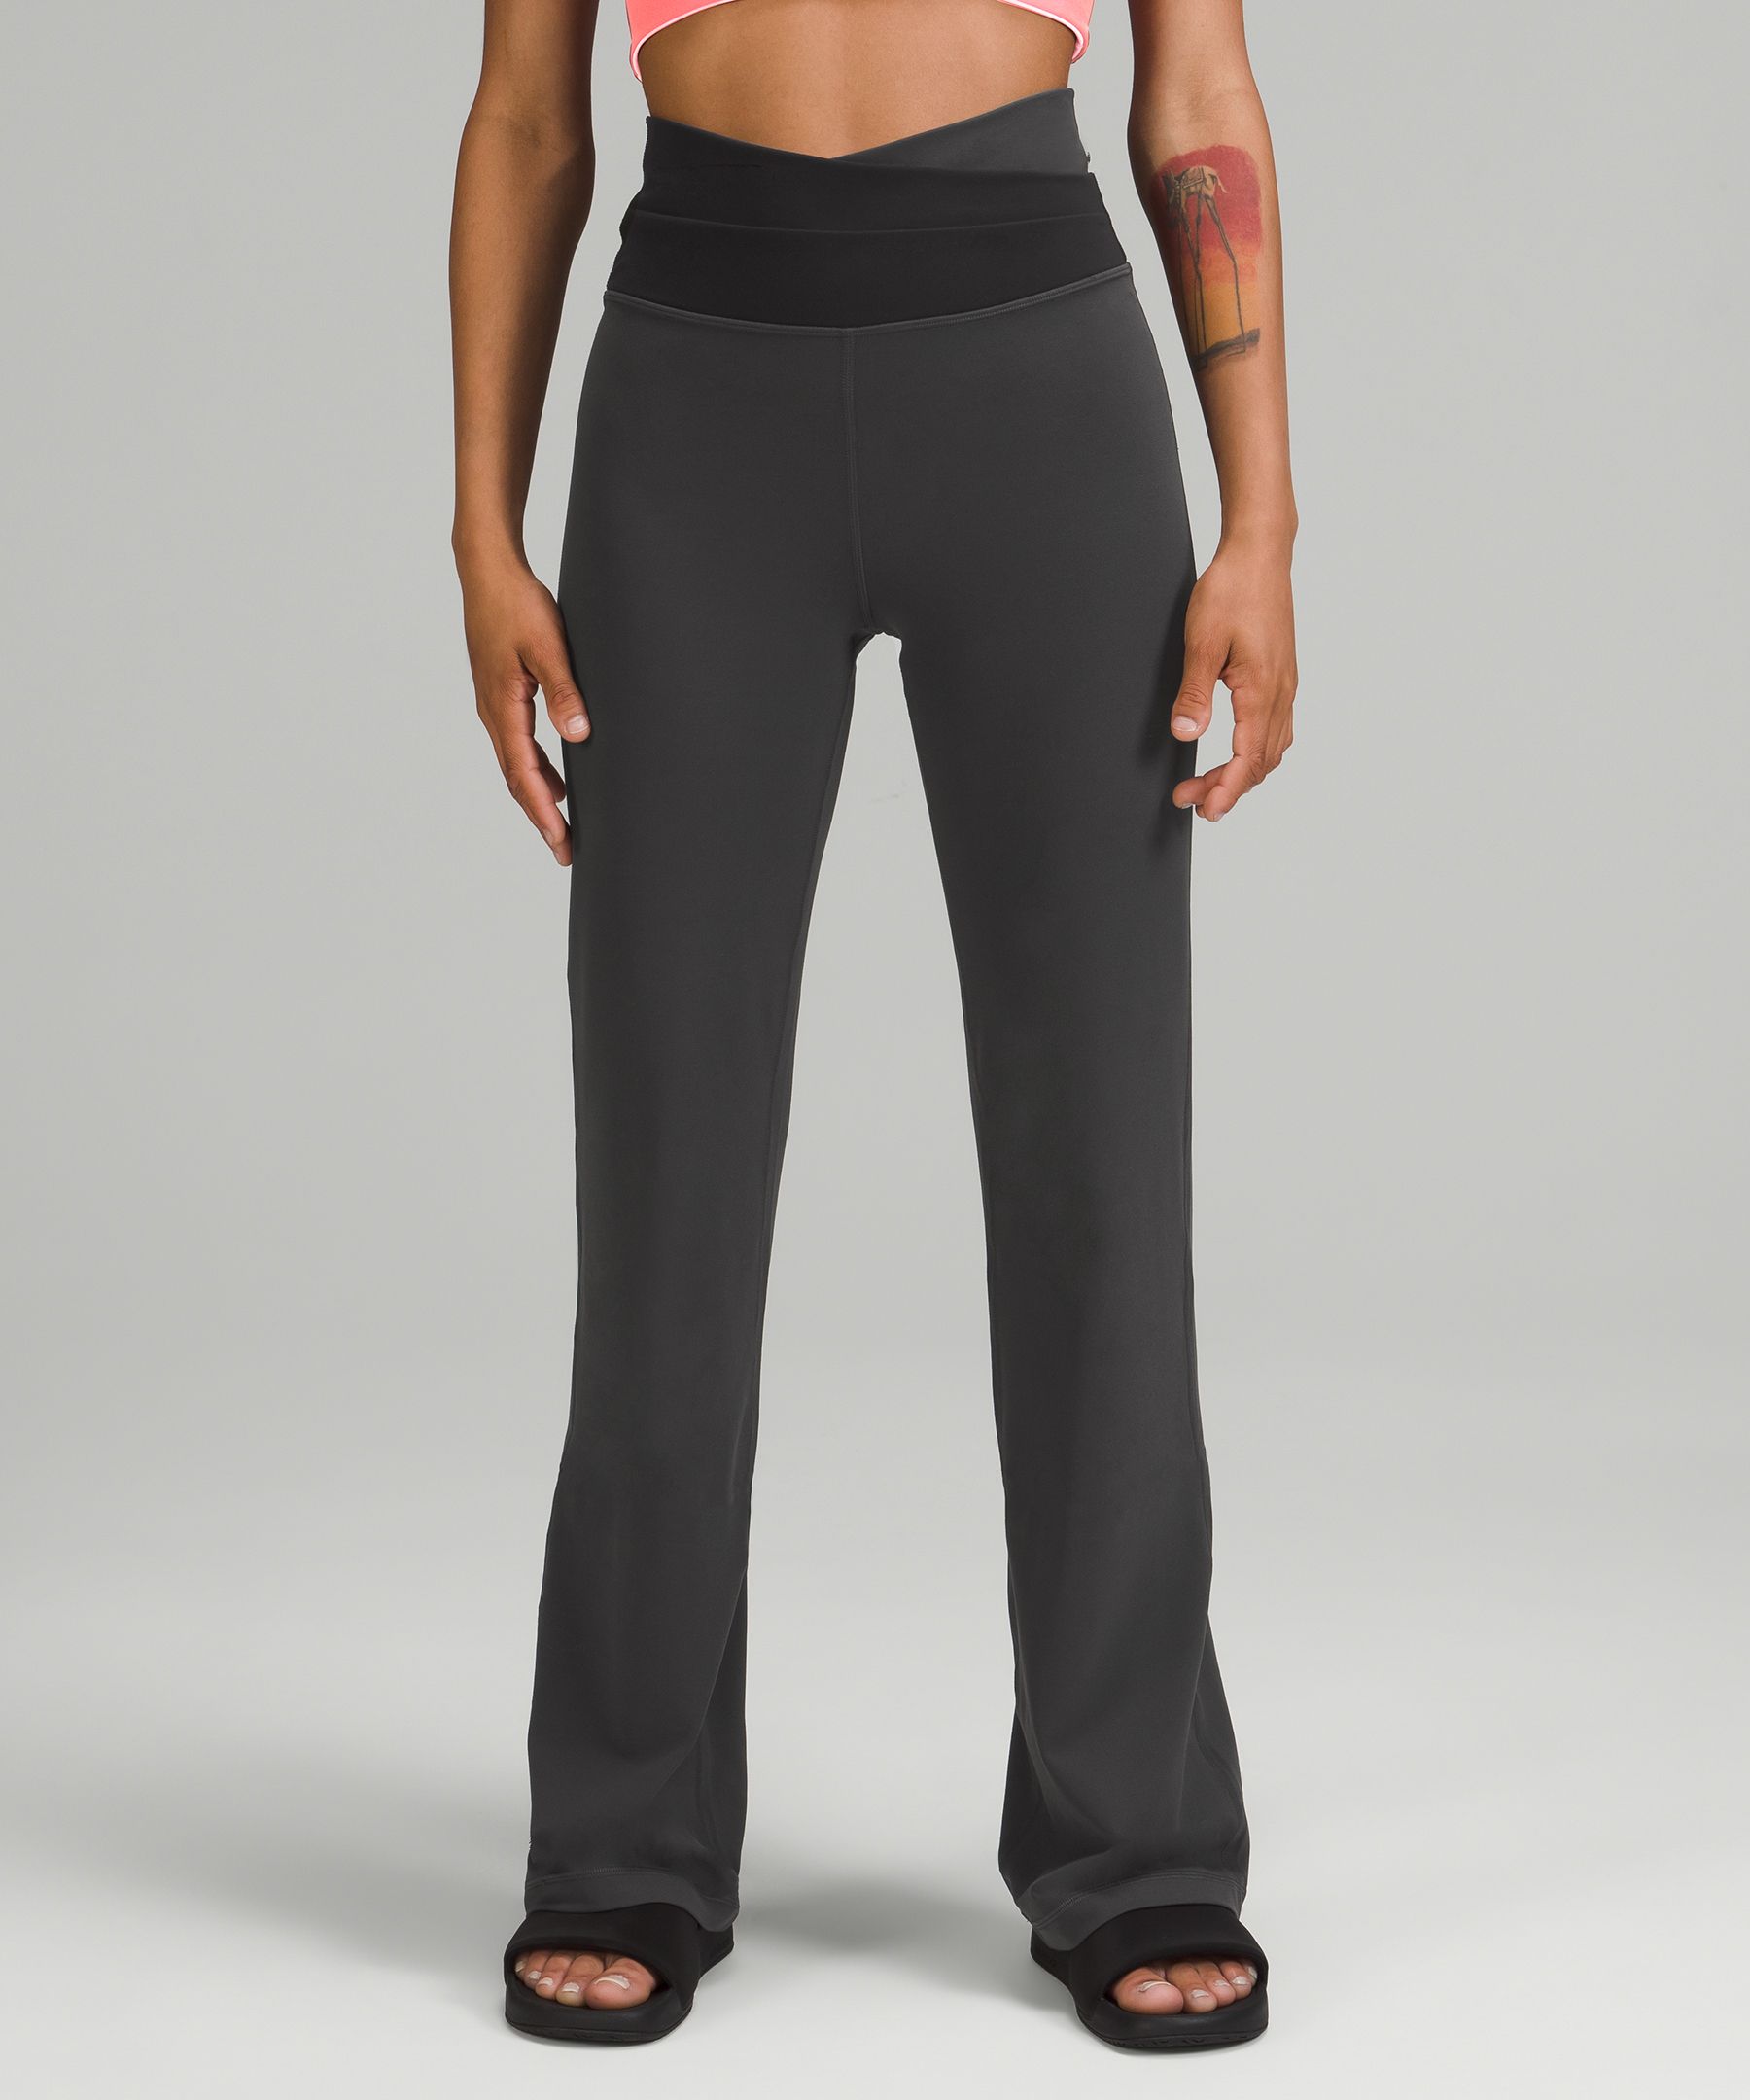 Yoga Pants Pantylines Photos, Download The BEST Free Yoga Pants Pantylines  Stock Photos & HD Images